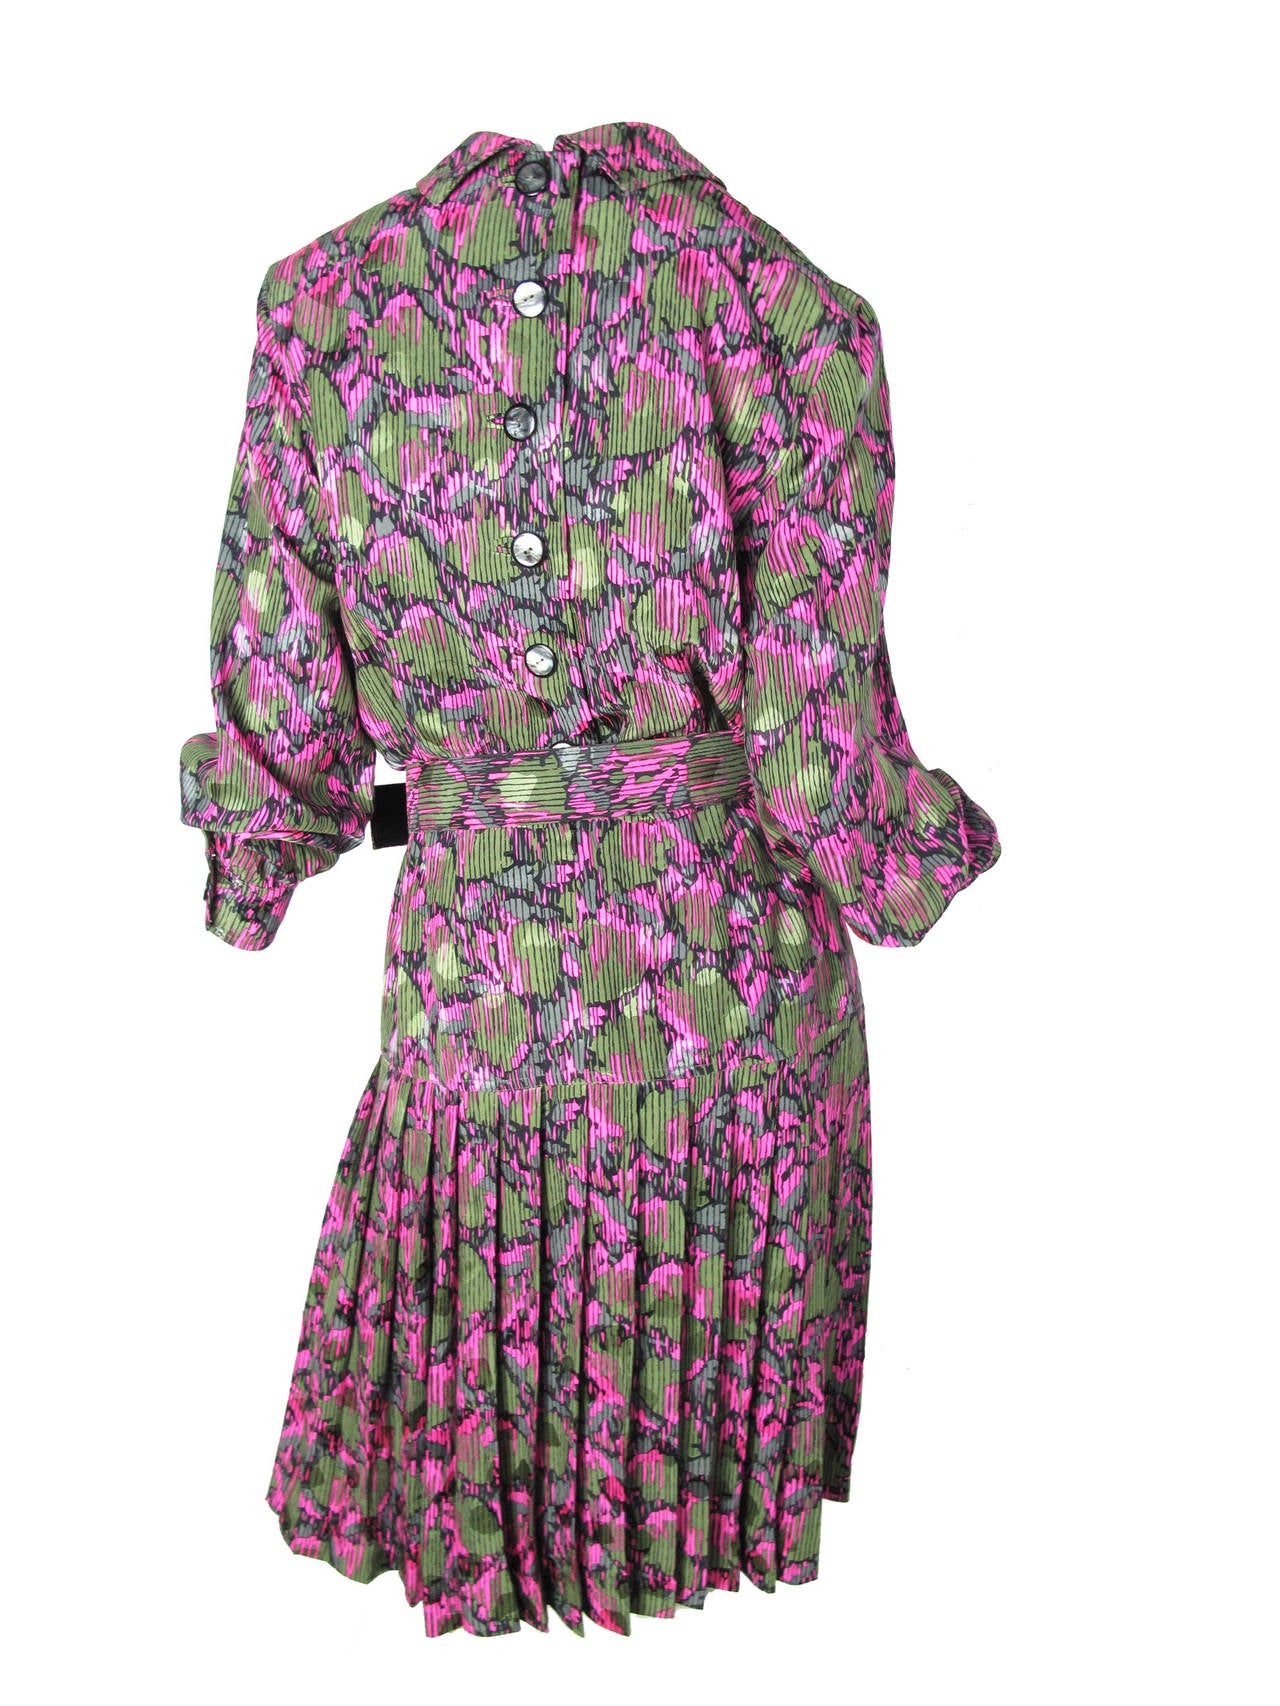 Adele Simpson green and pink printed silk dress with belt.  
Condition: Excellent.  

Size labeled 10

42